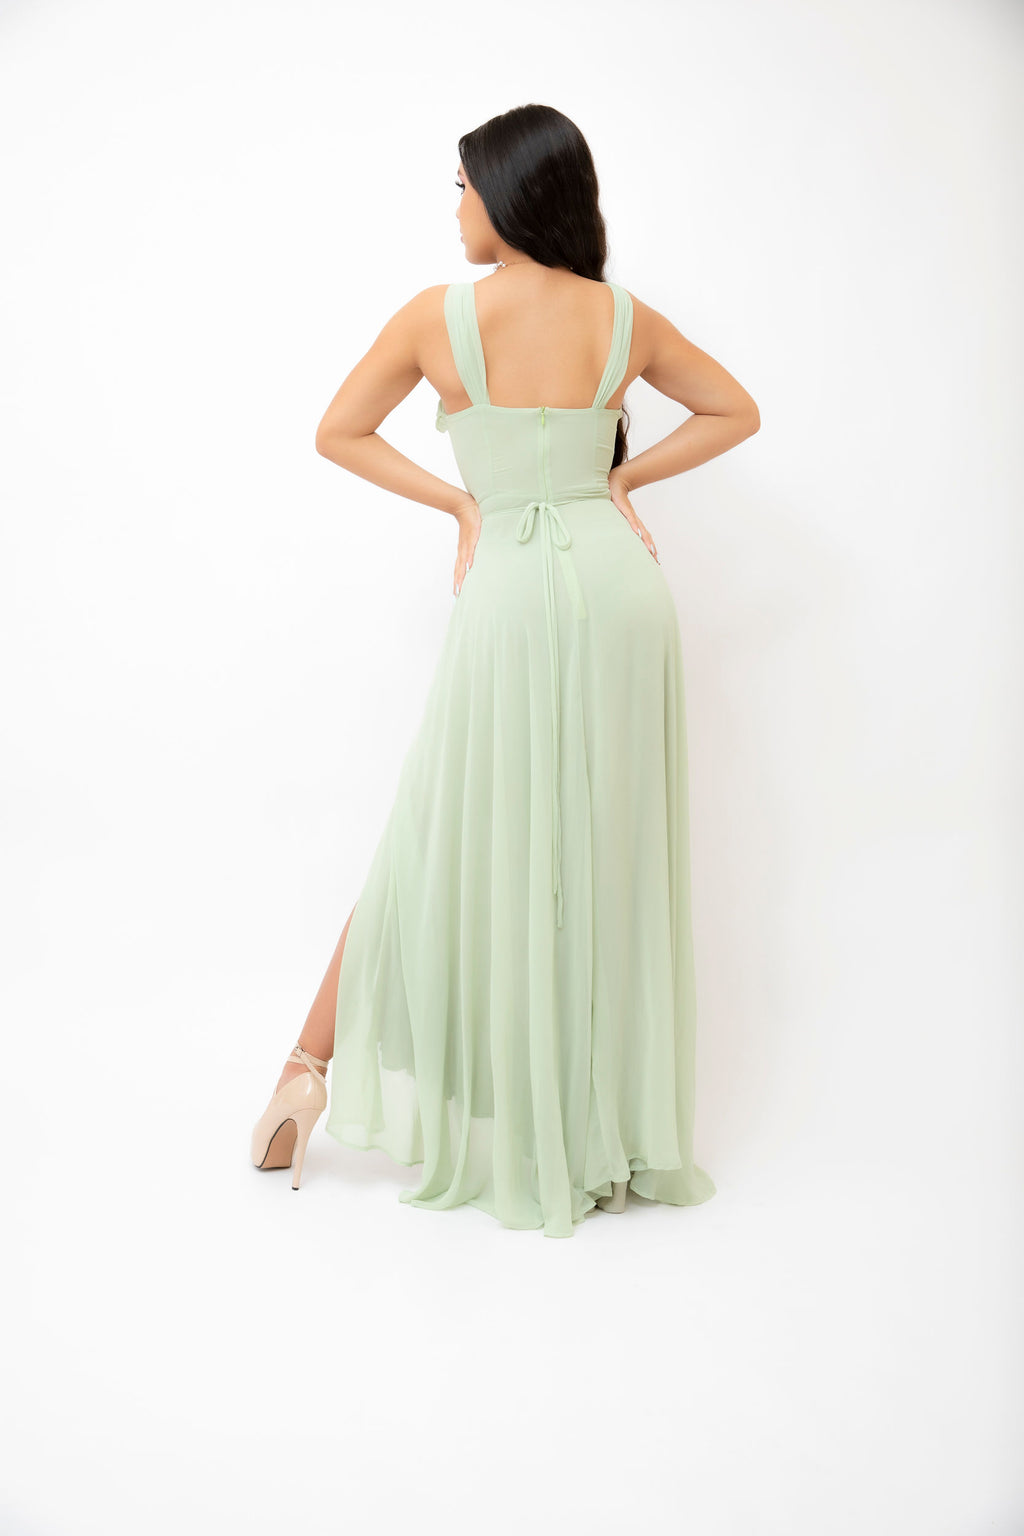 Green draped gown back view.